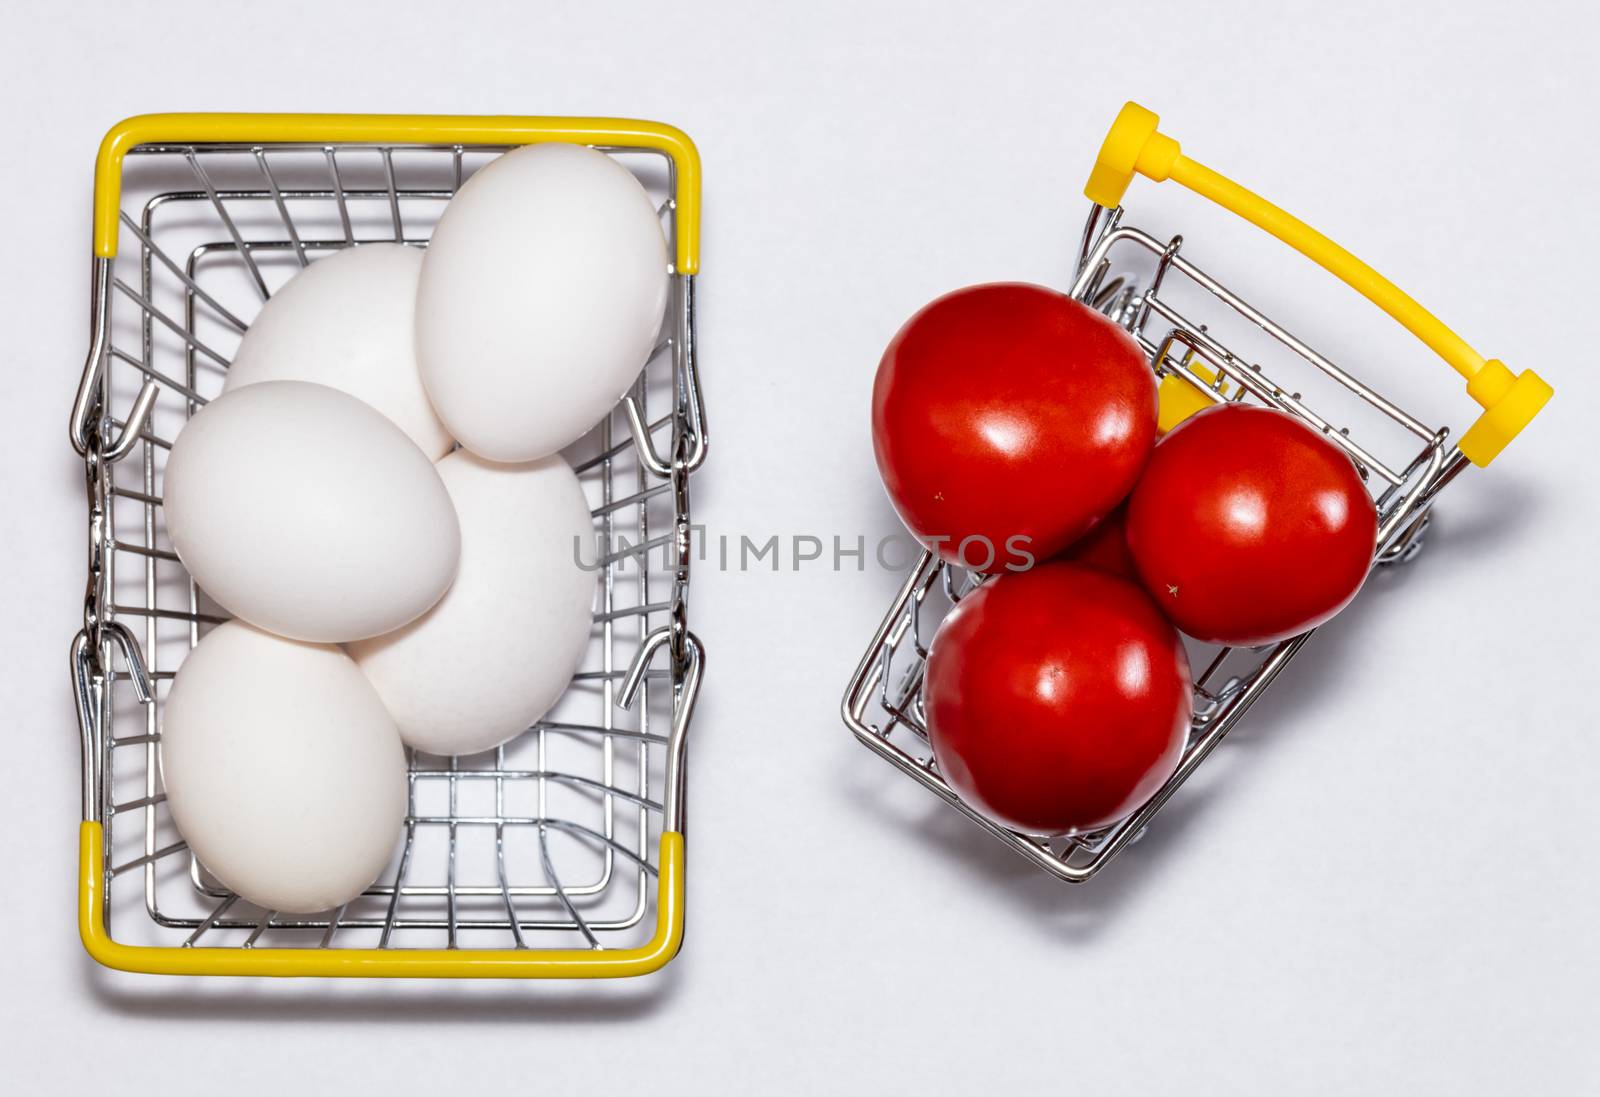 Fresh eggs and tomatoes in a shopping cart and a basket next to it. All mixed up. Top view. Shopping, purchasing, and food delivery concept. White background. Close up shot. Isolated.